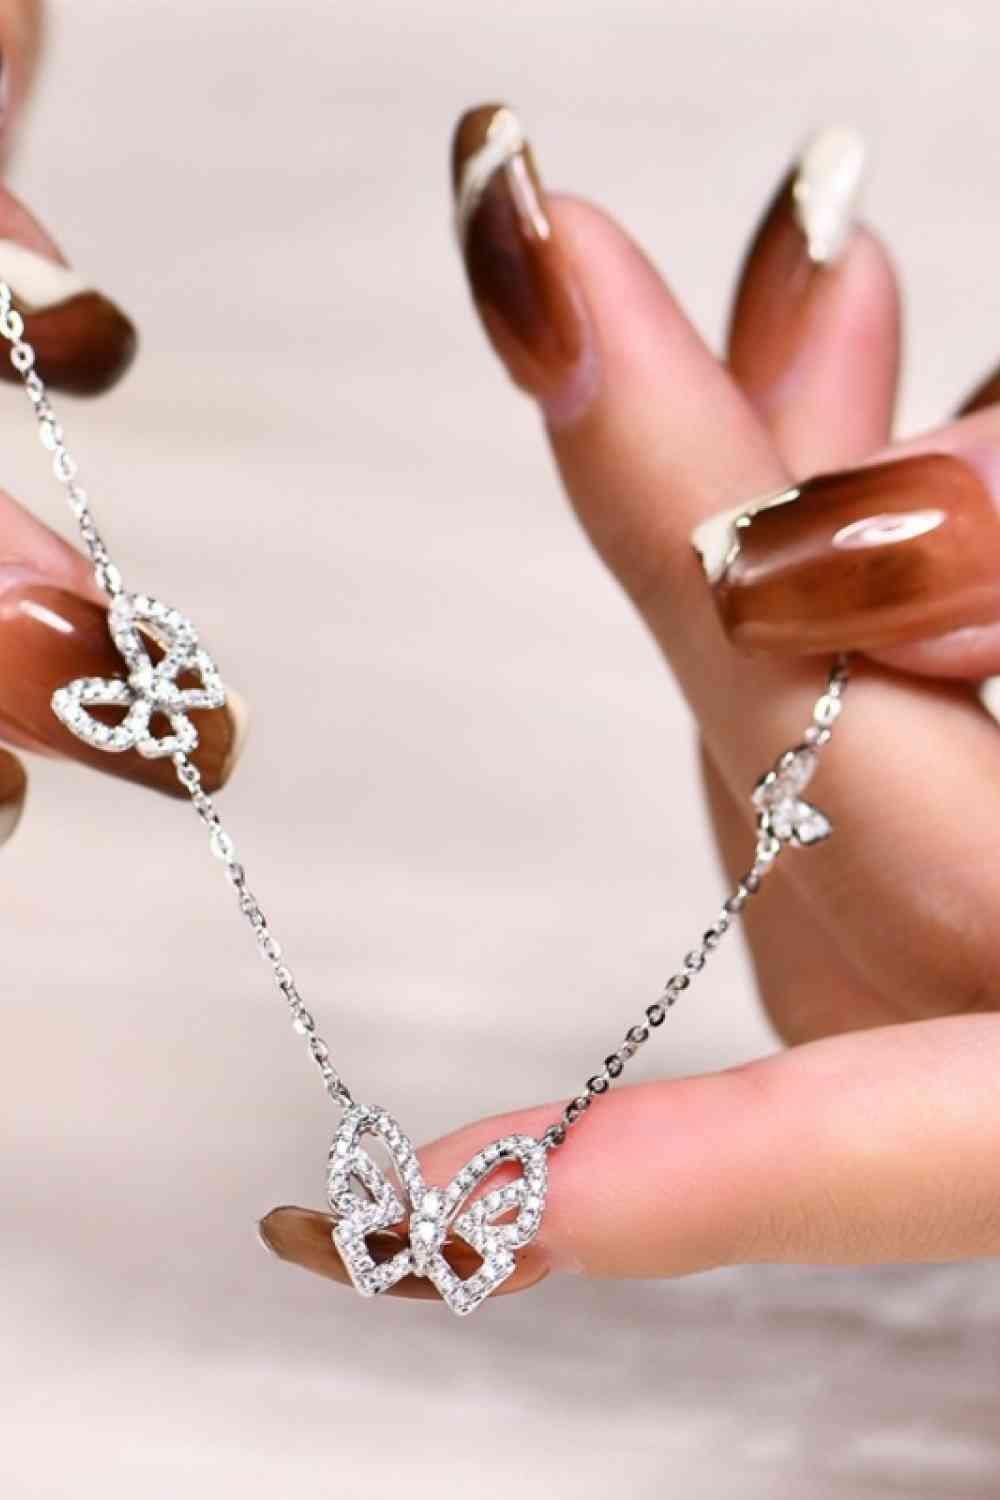 a woman's hand holding a diamond necklace